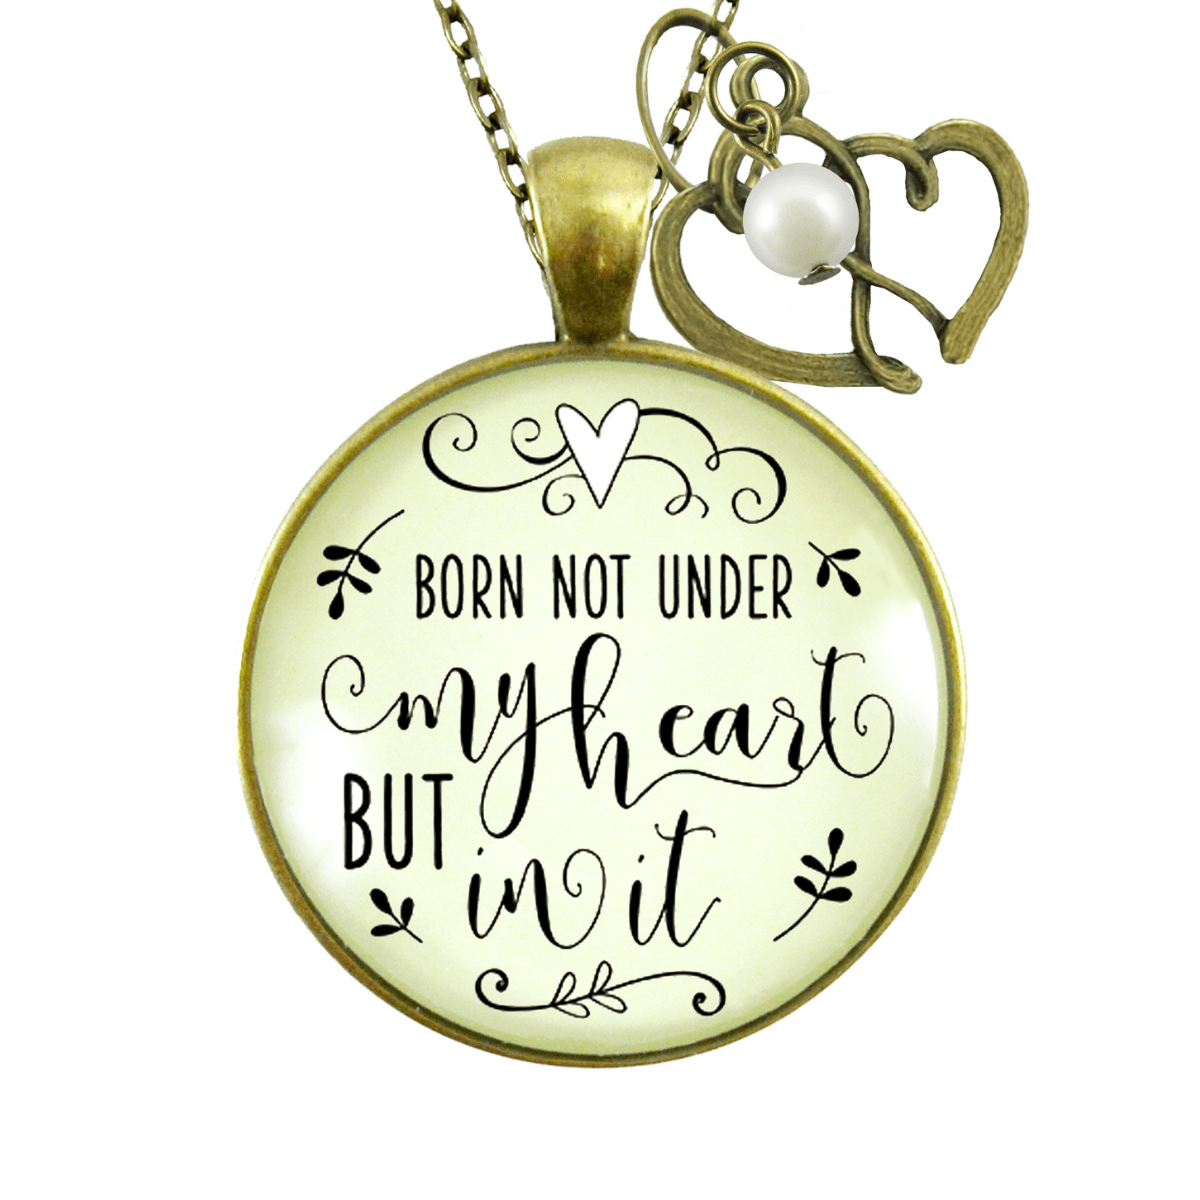 Gutsy Goodness Adoption Necklace Born Not Under My Heart Special Mom Jewelry Gift - Gutsy Goodness Handmade Jewelry;Born Not Under My Heart But In It - Gutsy Goodness Handmade Jewelry Gifts